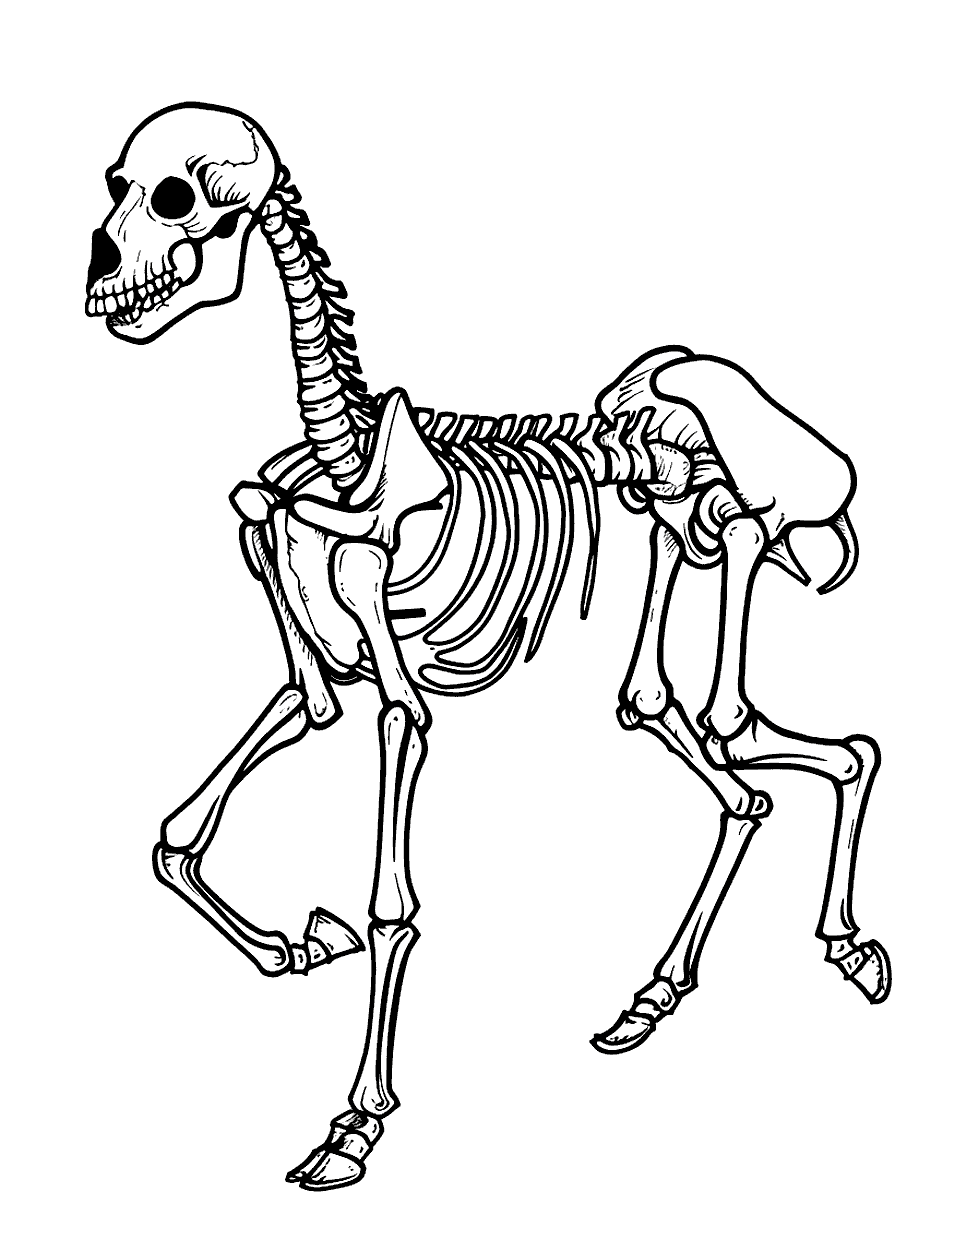 Horse Skeleton Galloping Coloring Page - A horse skeleton captured in mid-gallop, displaying its majestic form.